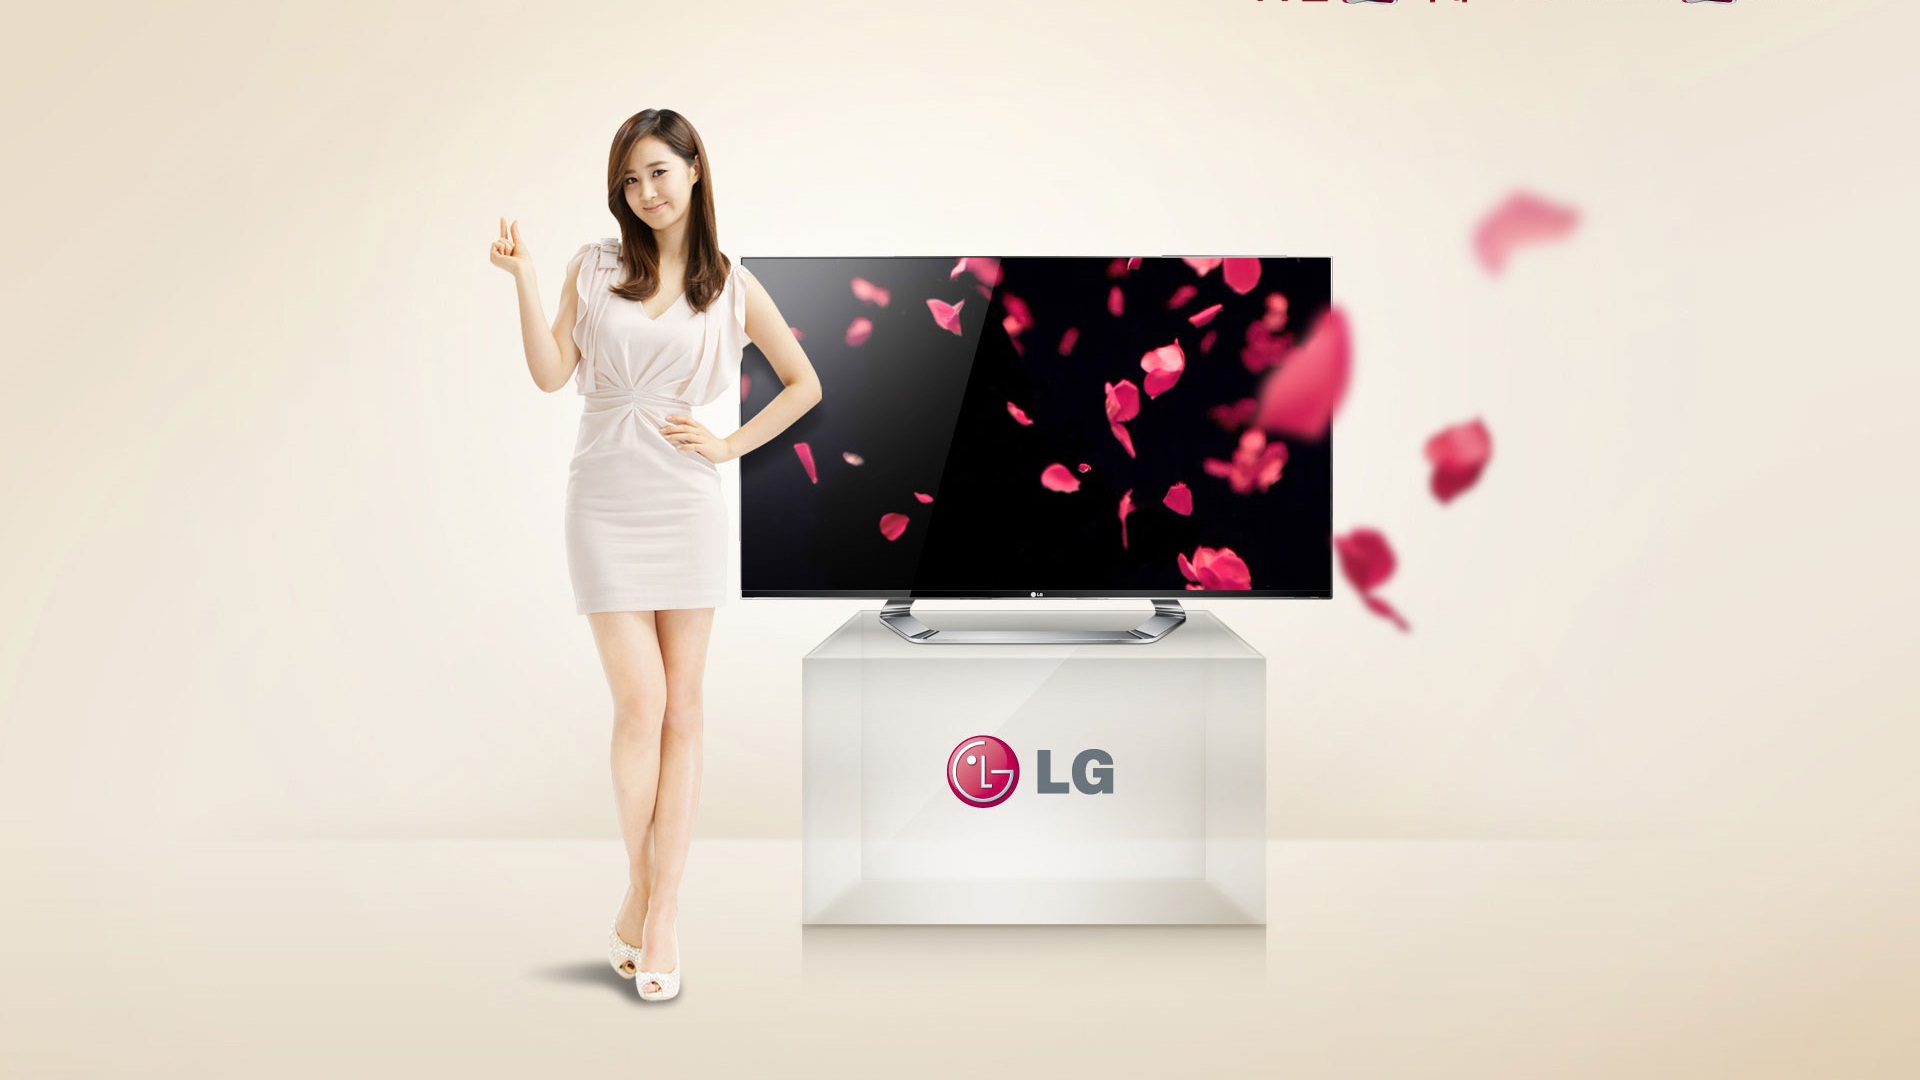 Girls Generation ACE and LG endorsements ads HD wallpapers #17 - 1920x1080